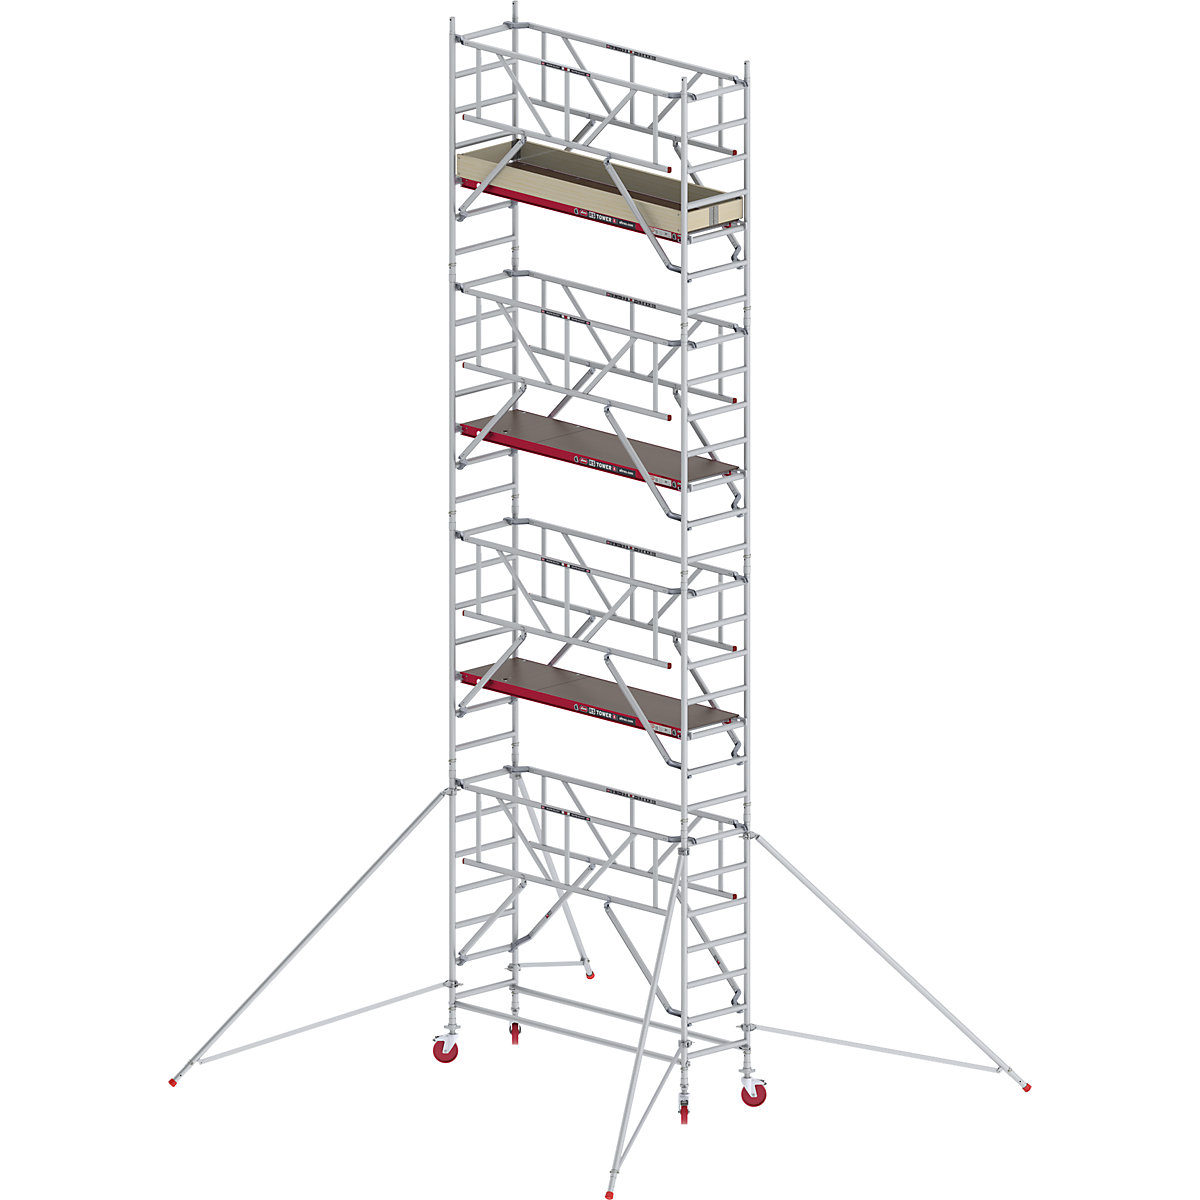 RS TOWER 41 slim mobile access tower with Safe-Quick® – Altrex, wooden platform, length 2.45 m, working height 9.20 m-2